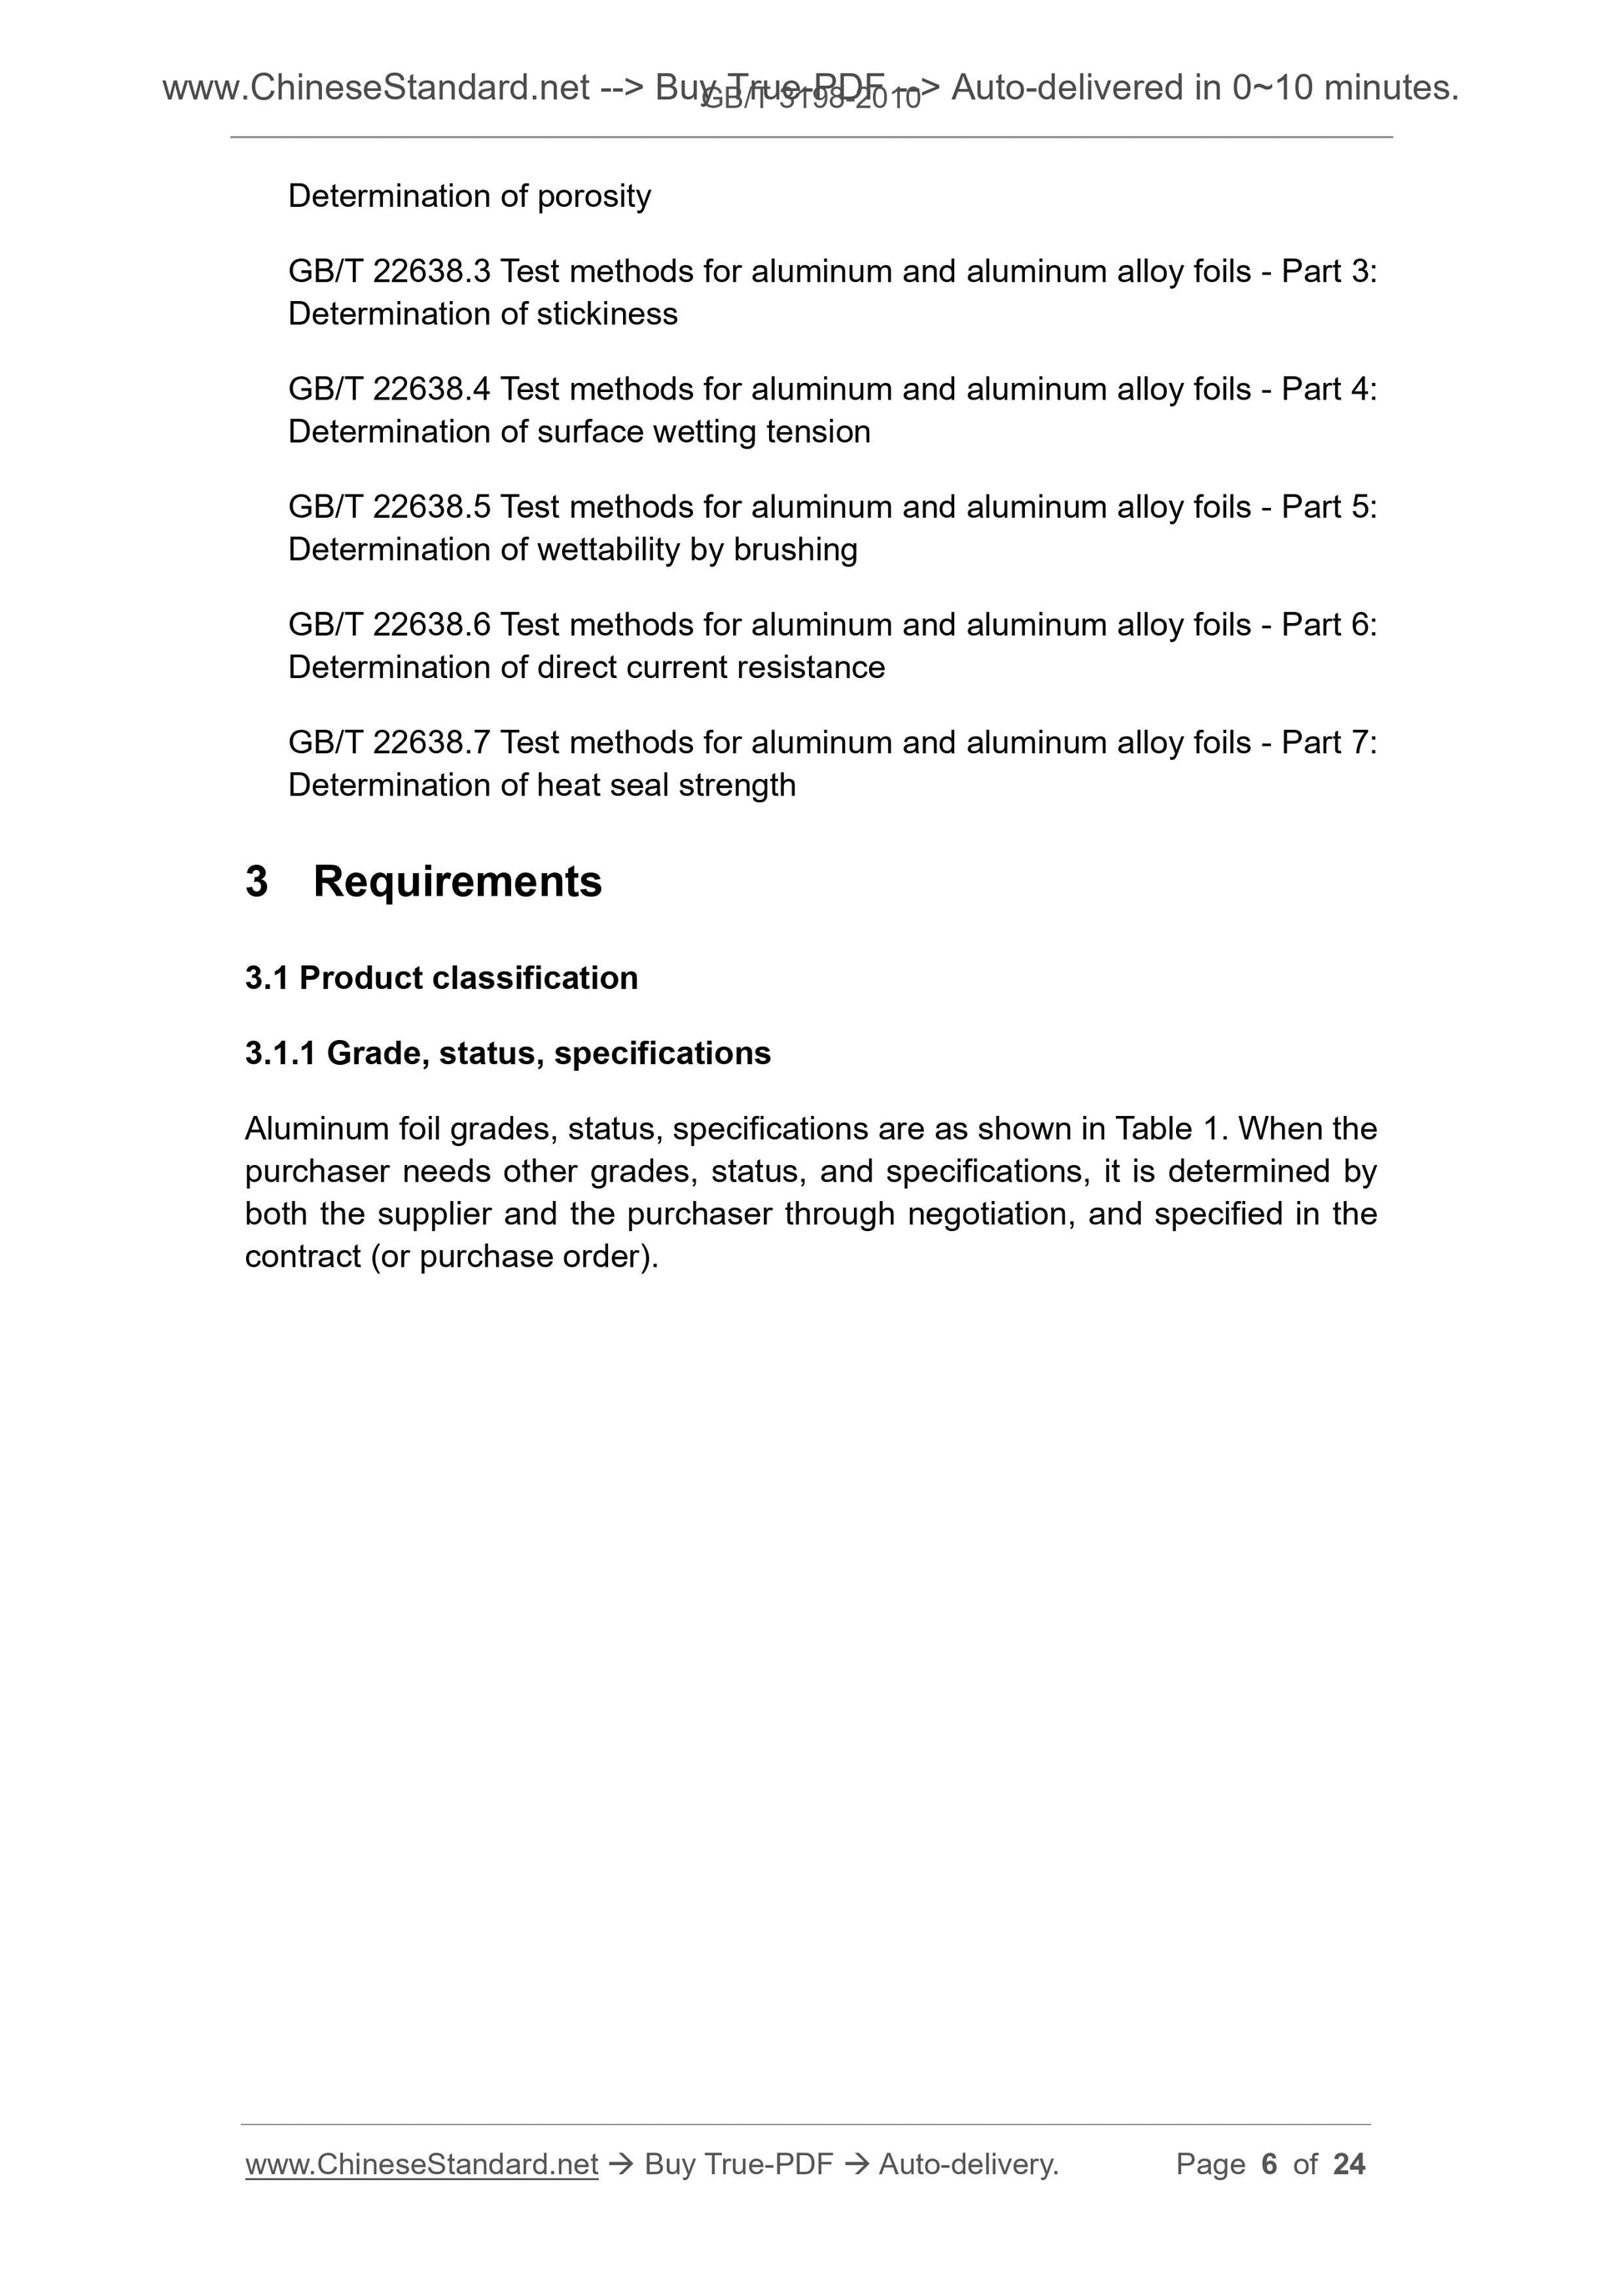 GB/T 3198-2010 Page 5